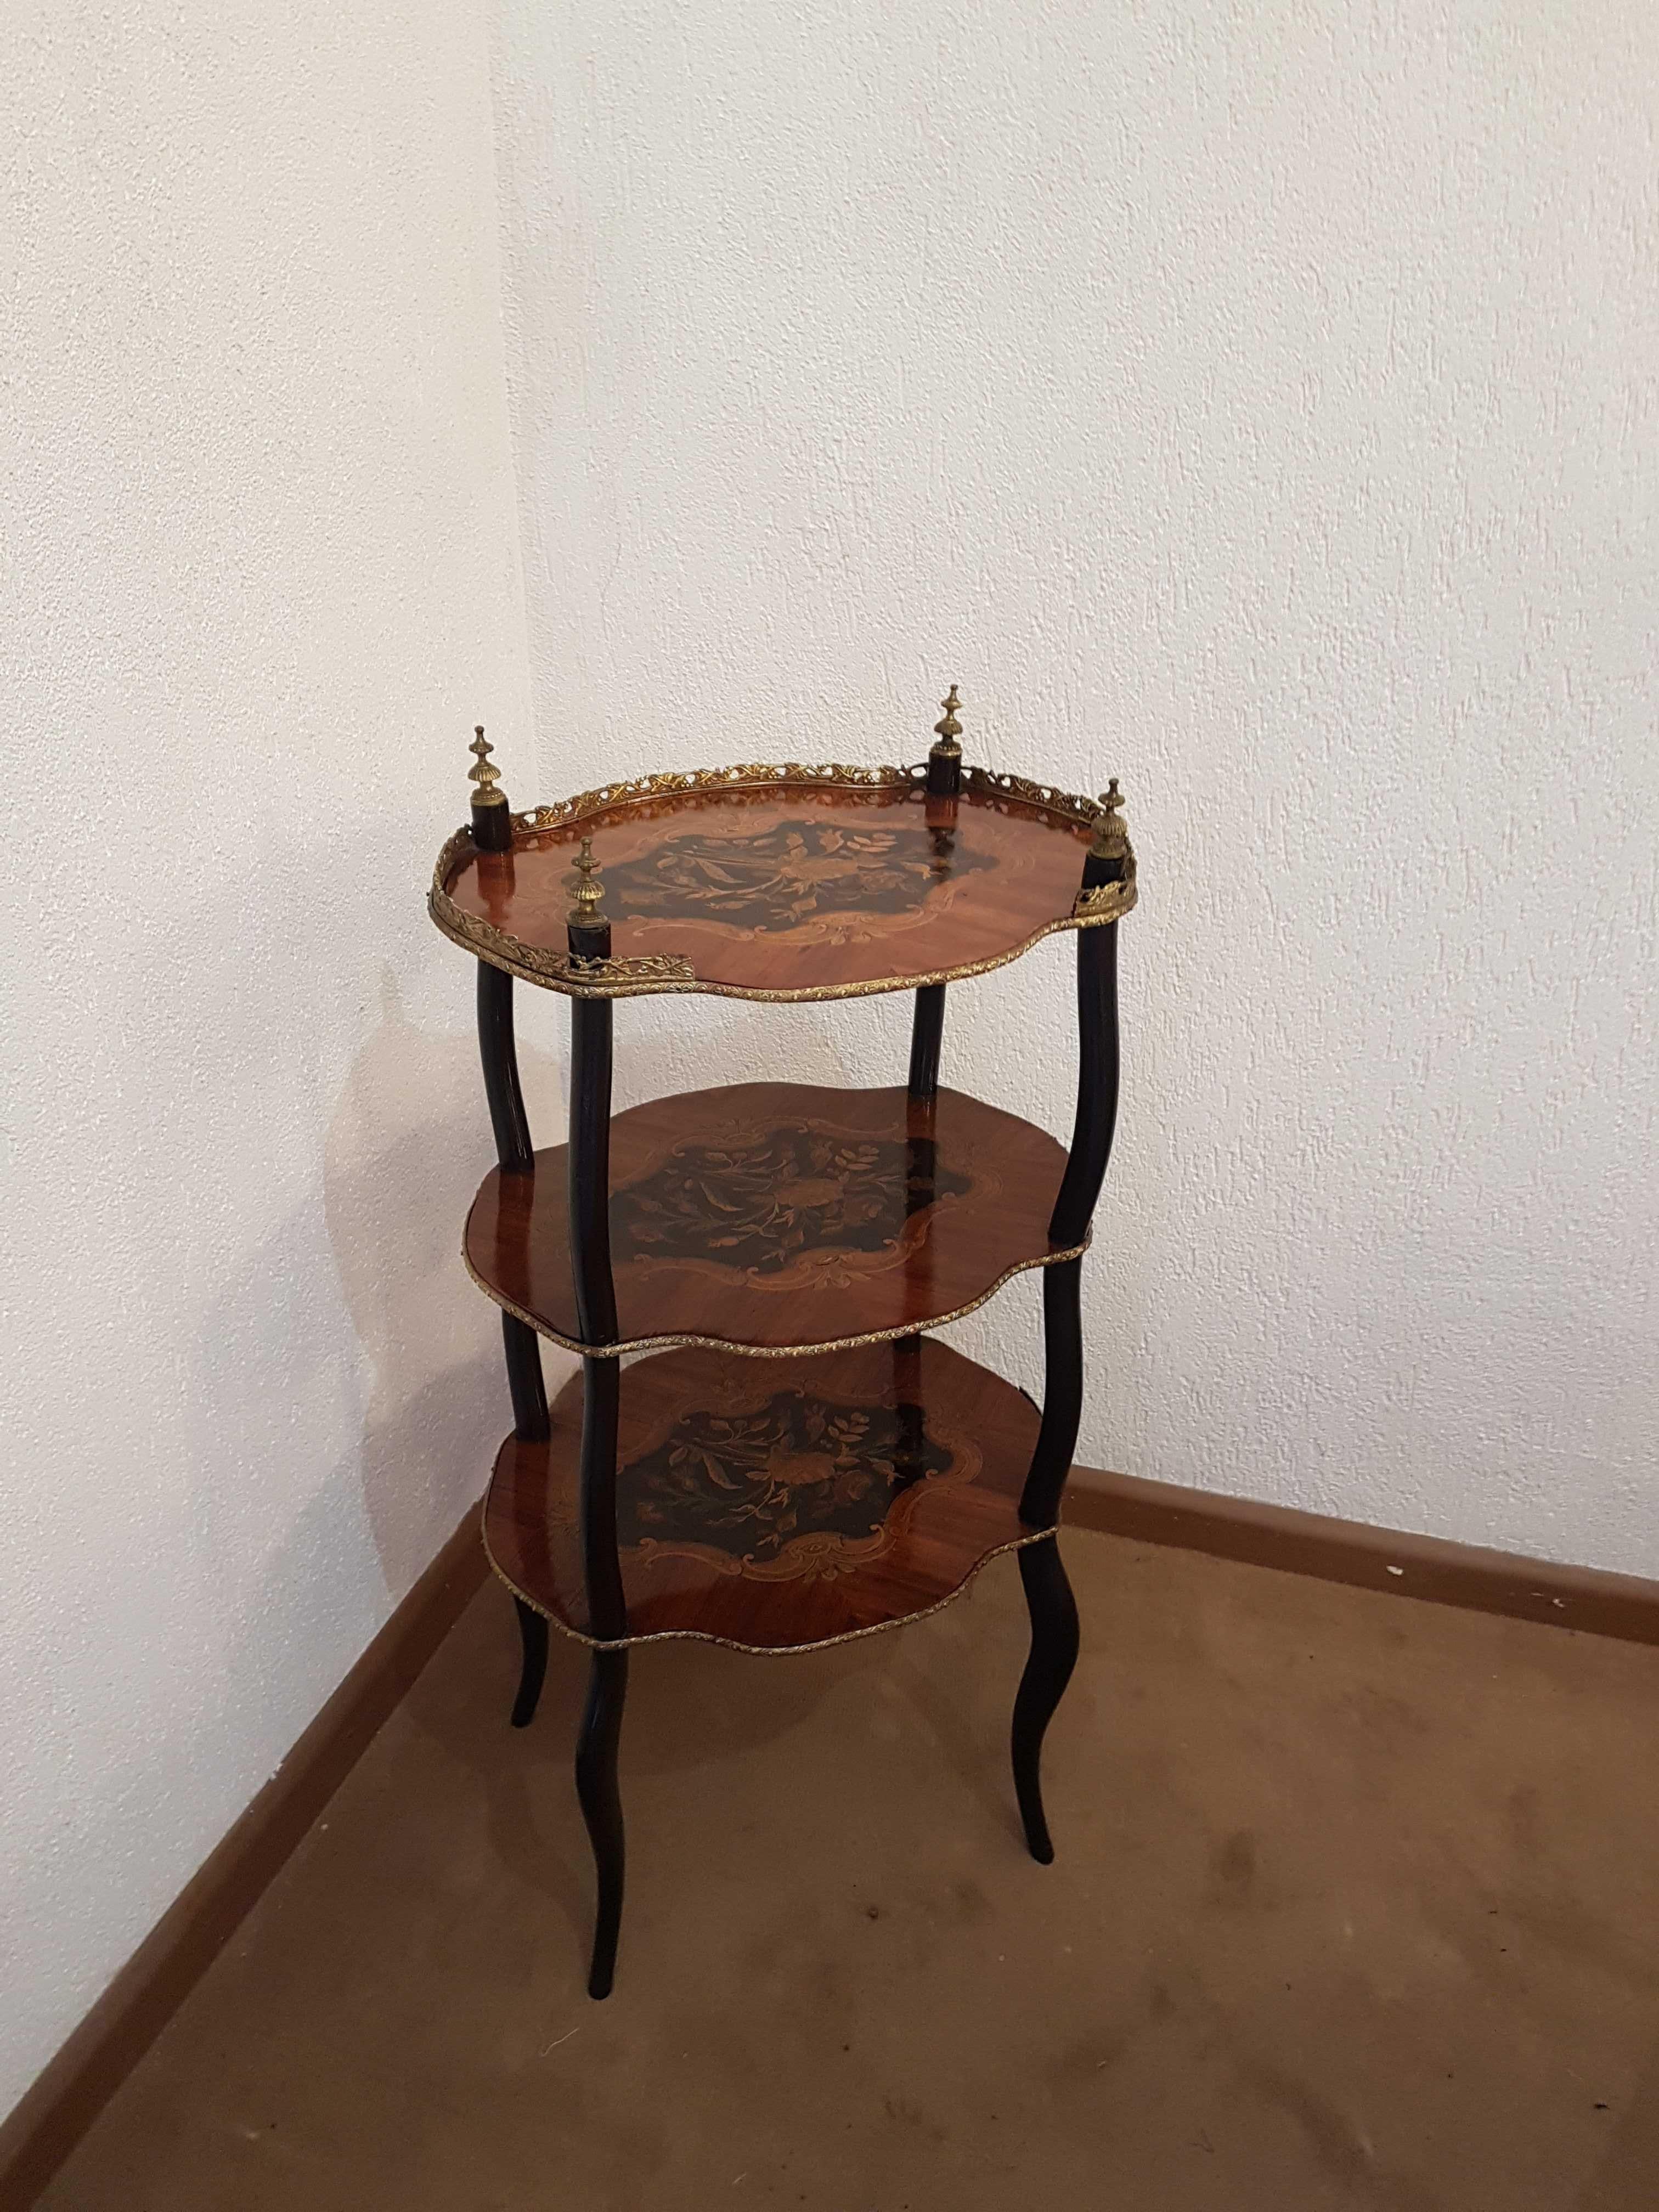 Quality antique French marquetry étagère, having a pierced gilt gallery with lovely marquetry inlaid shaped top, two shaped under-tiers with marquetry inlay, standing on four ebonized legs.
Lovely color and condition.